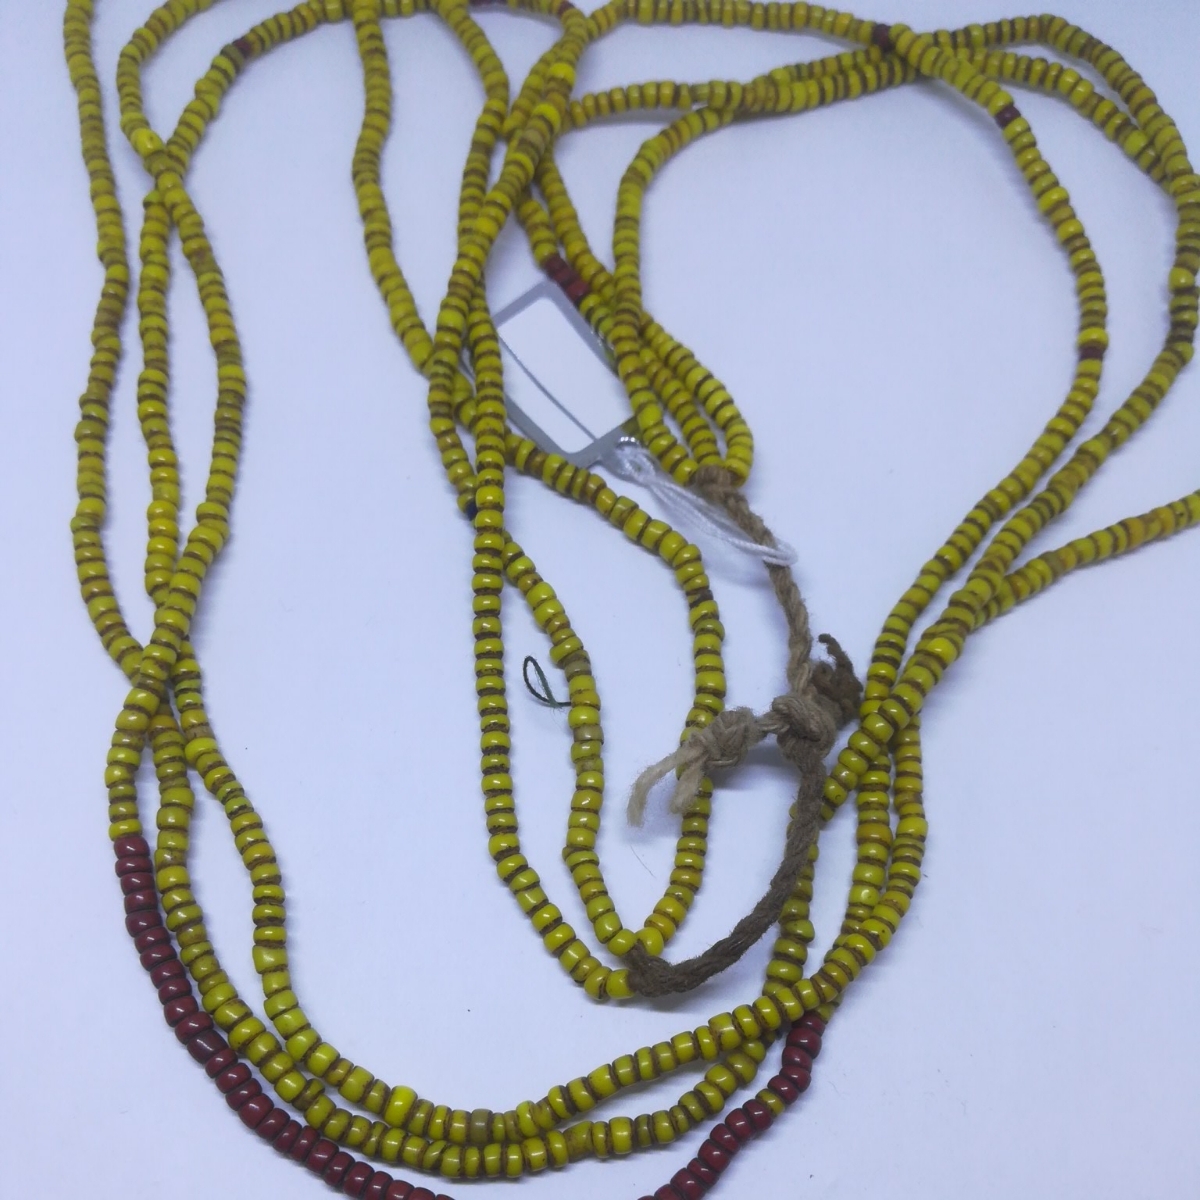  Myanma Bill managa group ka chin antique 3 ream glass beads necklace 50 year and more front. goods yellow color + red antique antique 70cmX3 ream beads 3mm regular price Y9800